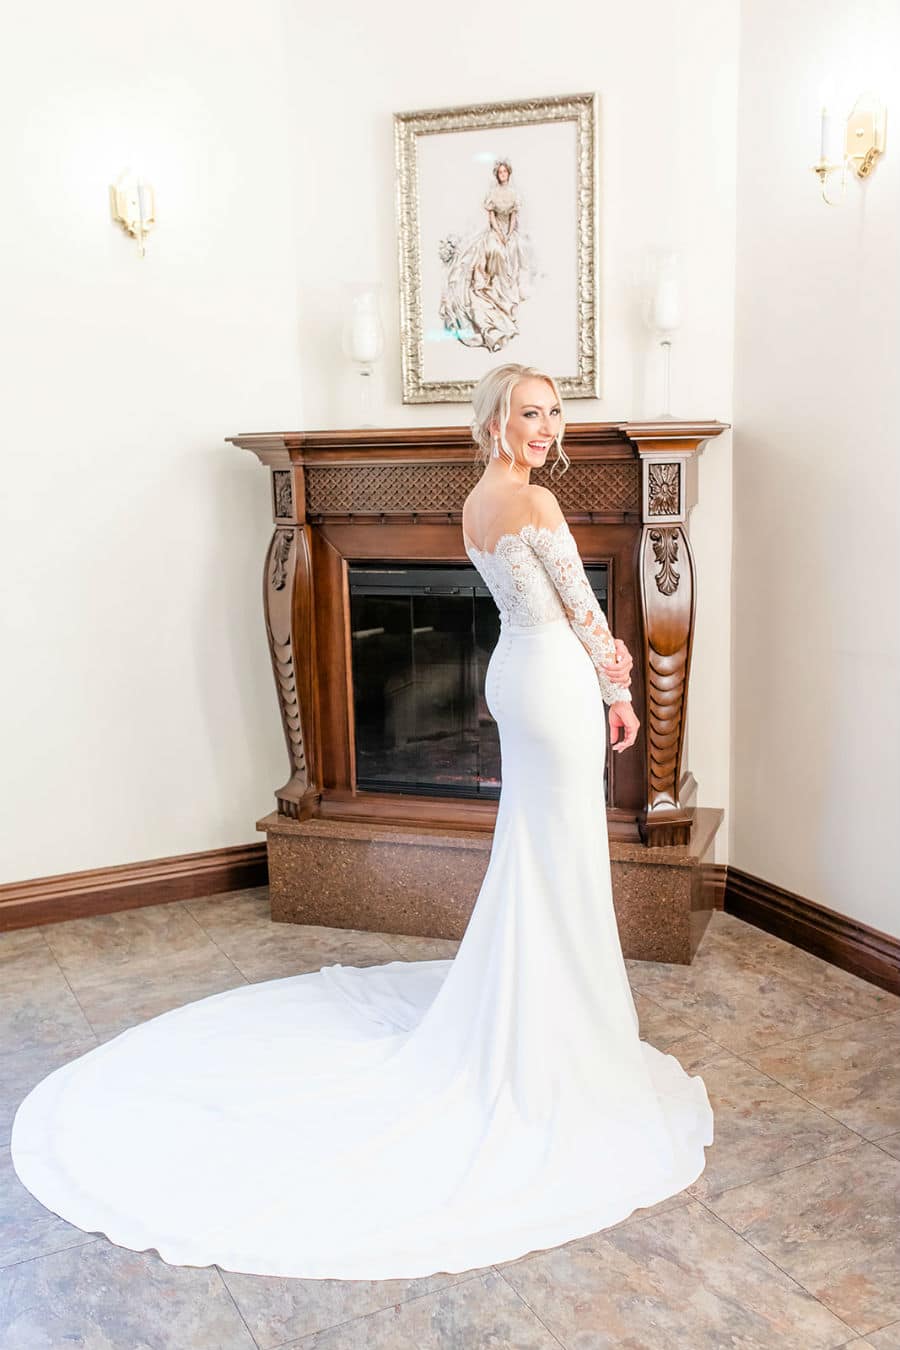 The bride in her long, white dress